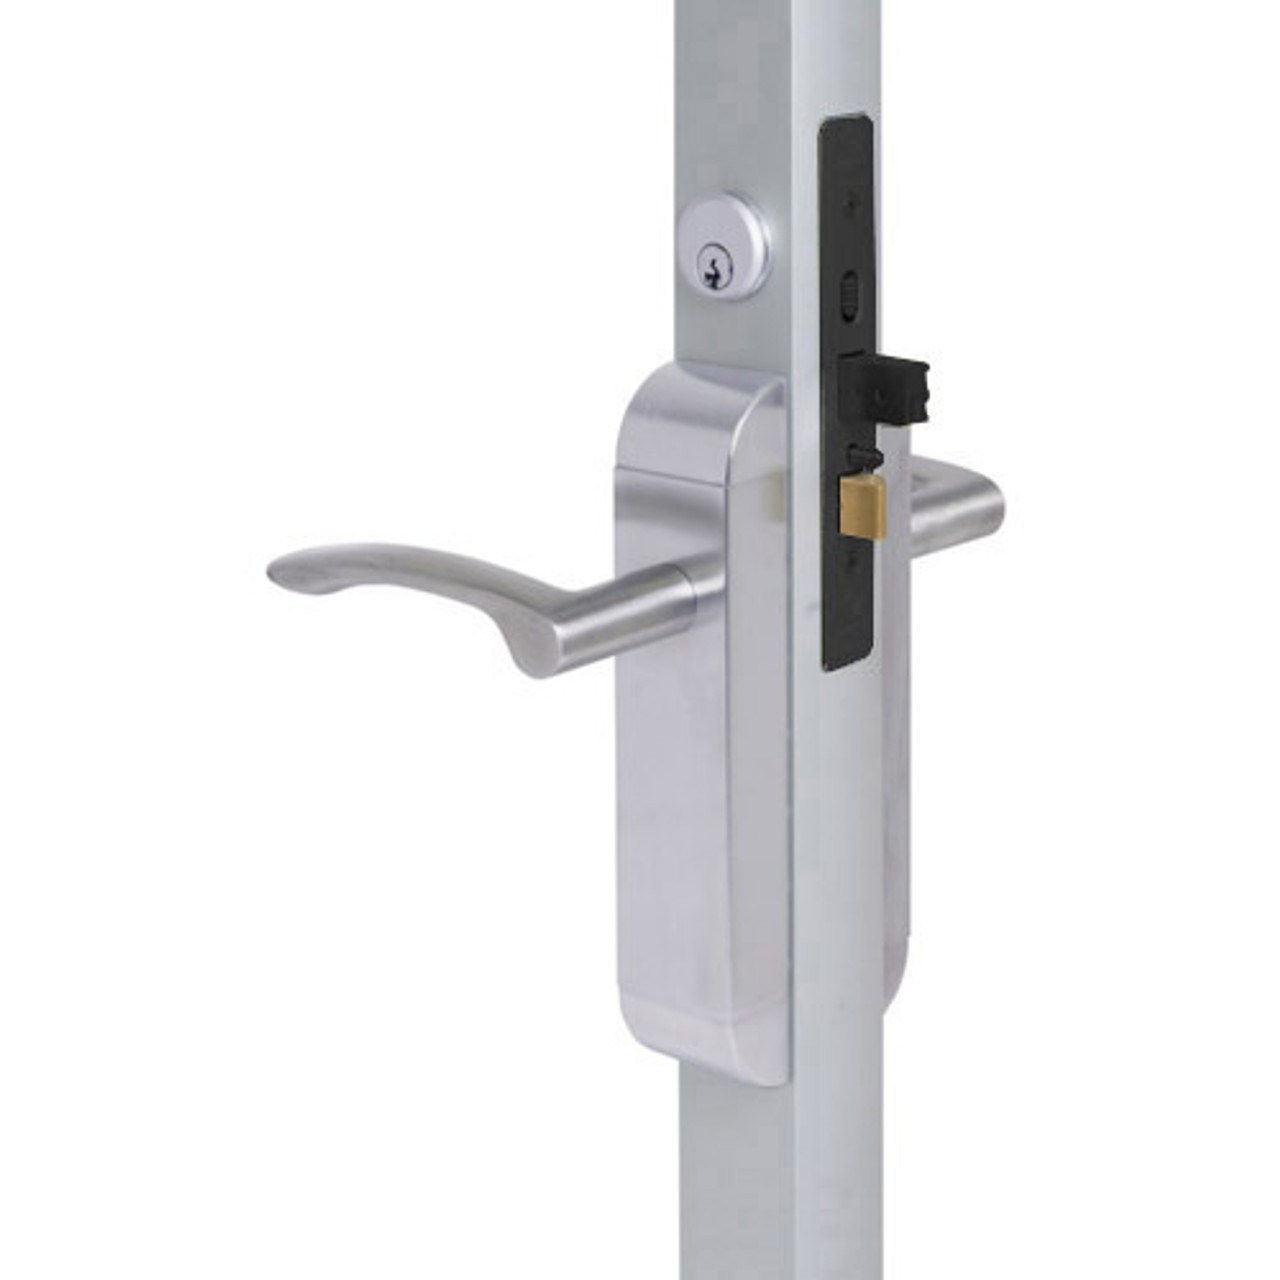 2190-443-201-32 Adams Rite Dual Force Interconnected 2190 series Deadlock/Deadlatch in Bright Stainless